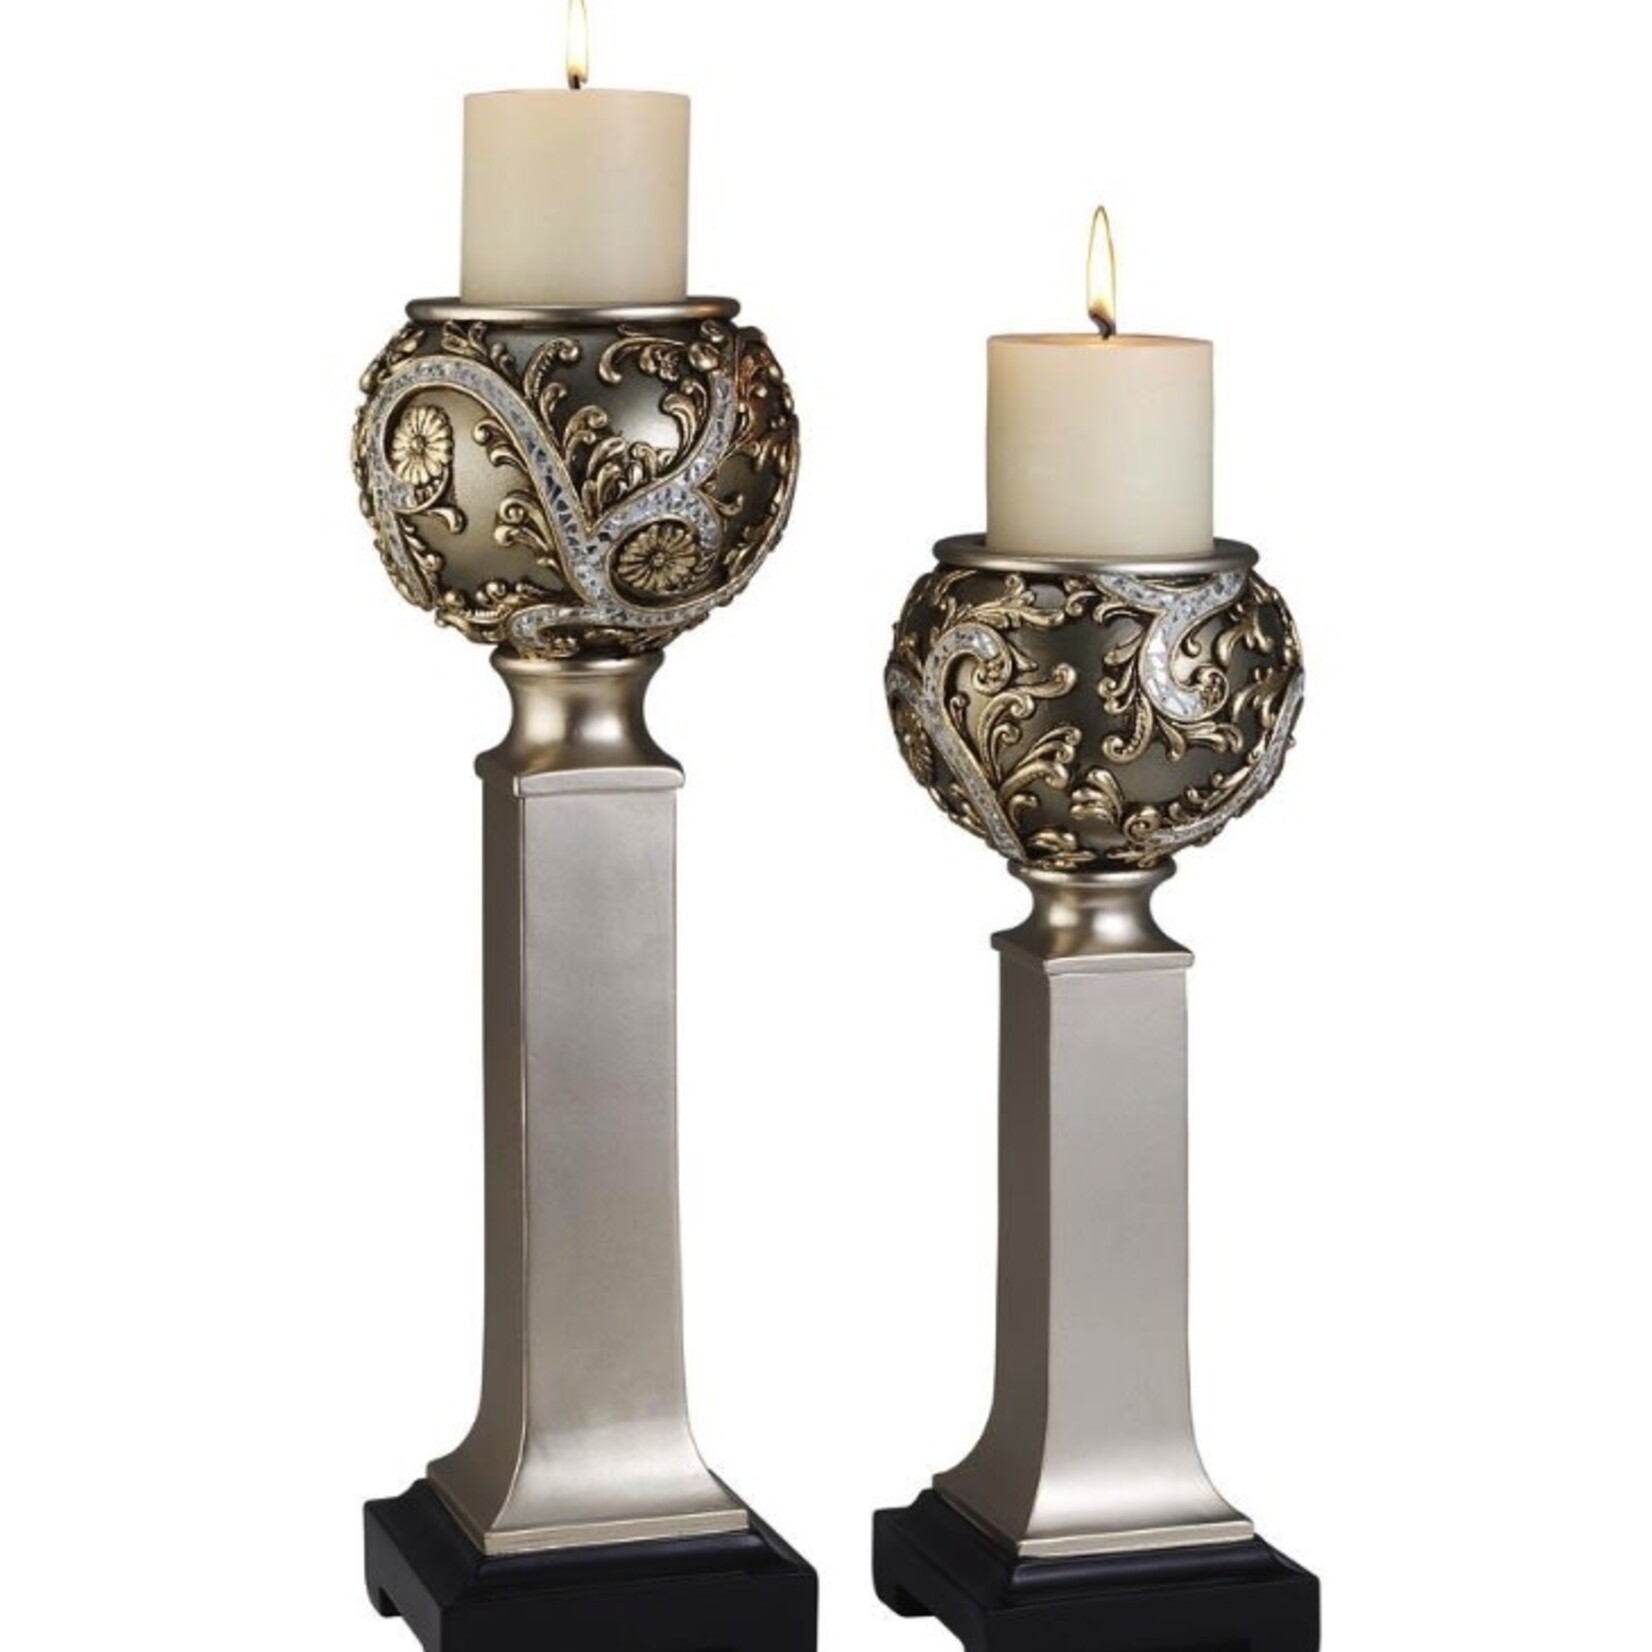 House of Zog Inc. Silver Vine Candleholders, Set of 2